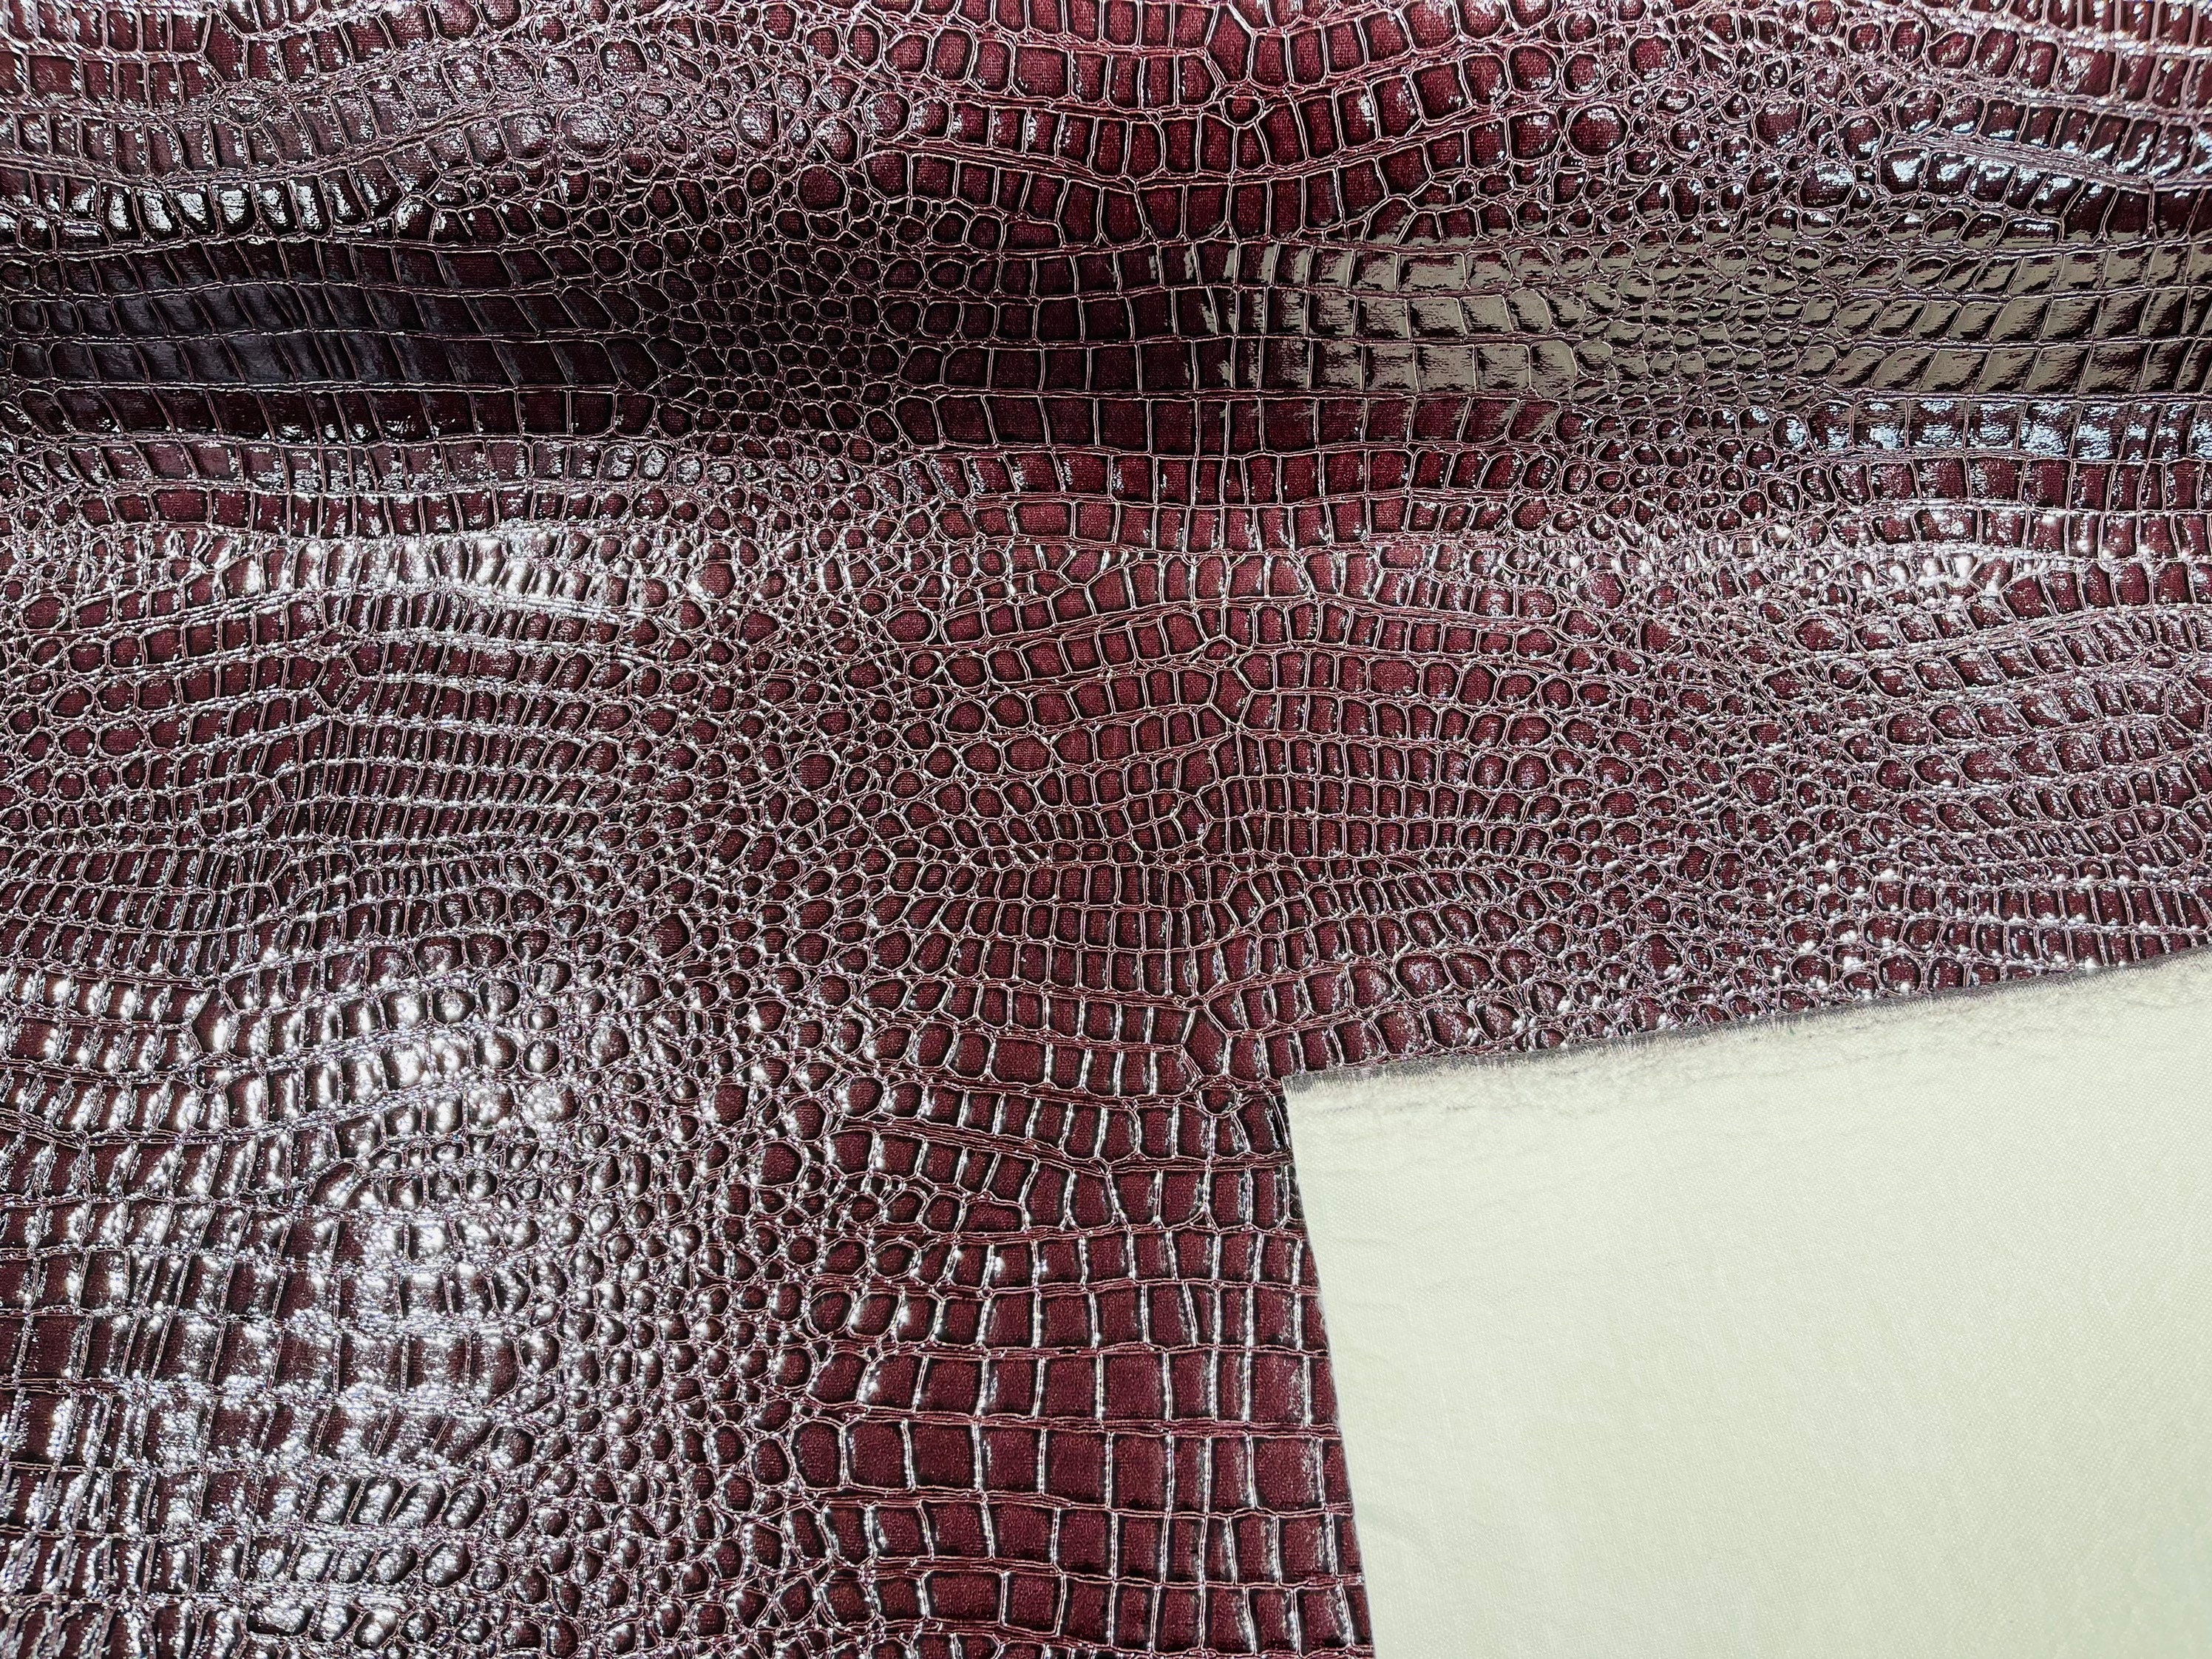 Vinyl Crocodile SILVER Fake Leather Upholstery Fabric By the Yard 54